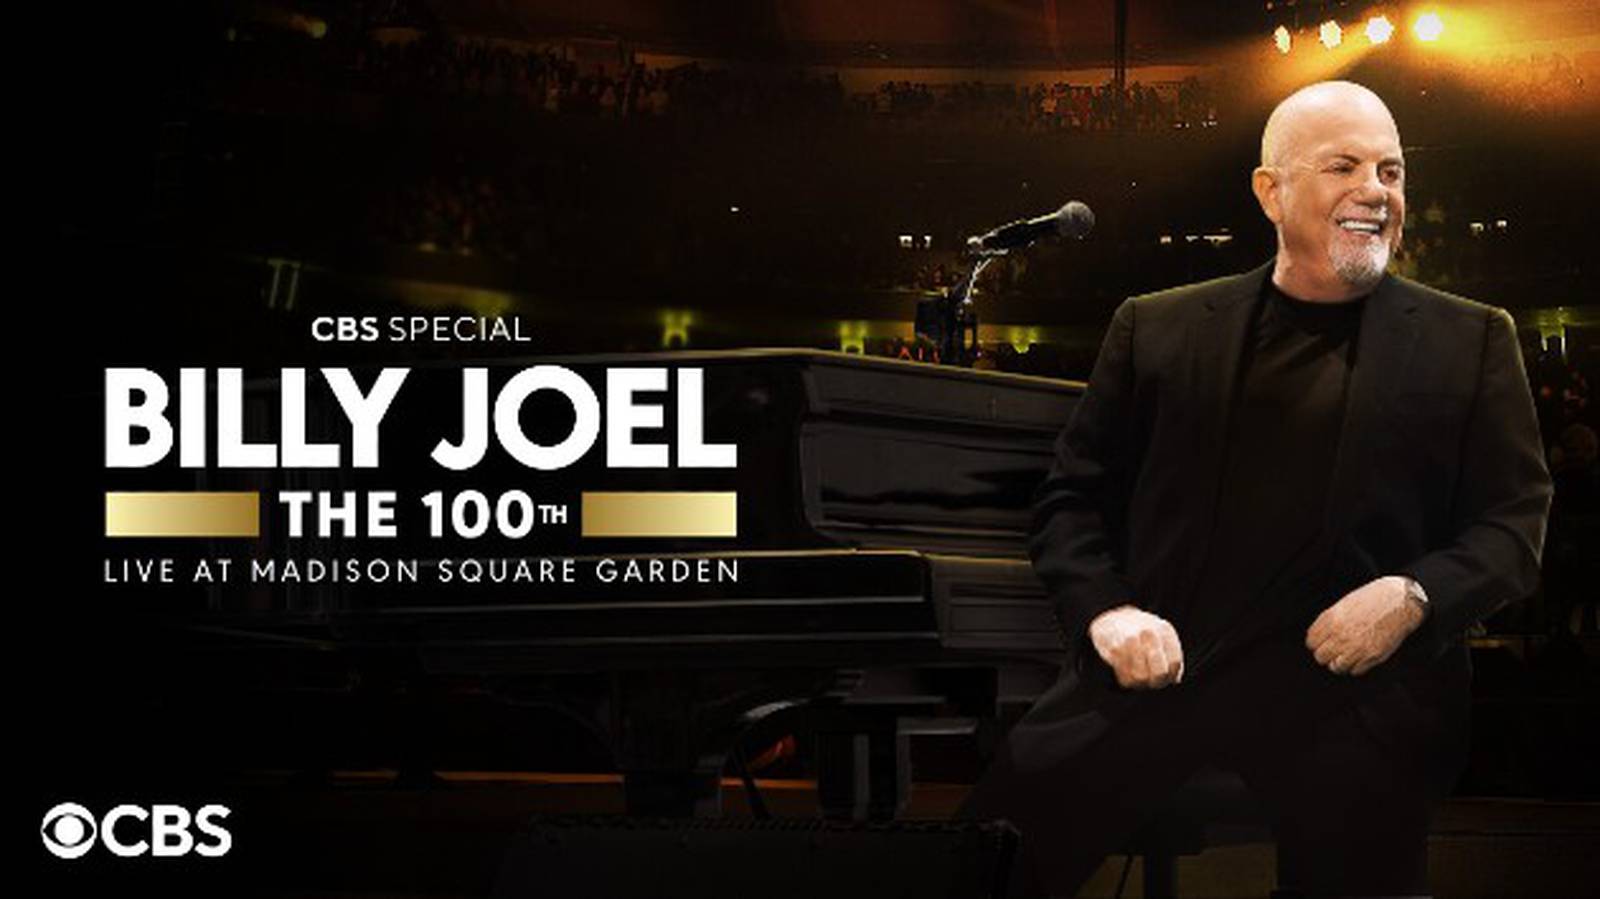 Tune in to Billy Joel's 100th Madison Square Garden residency concert